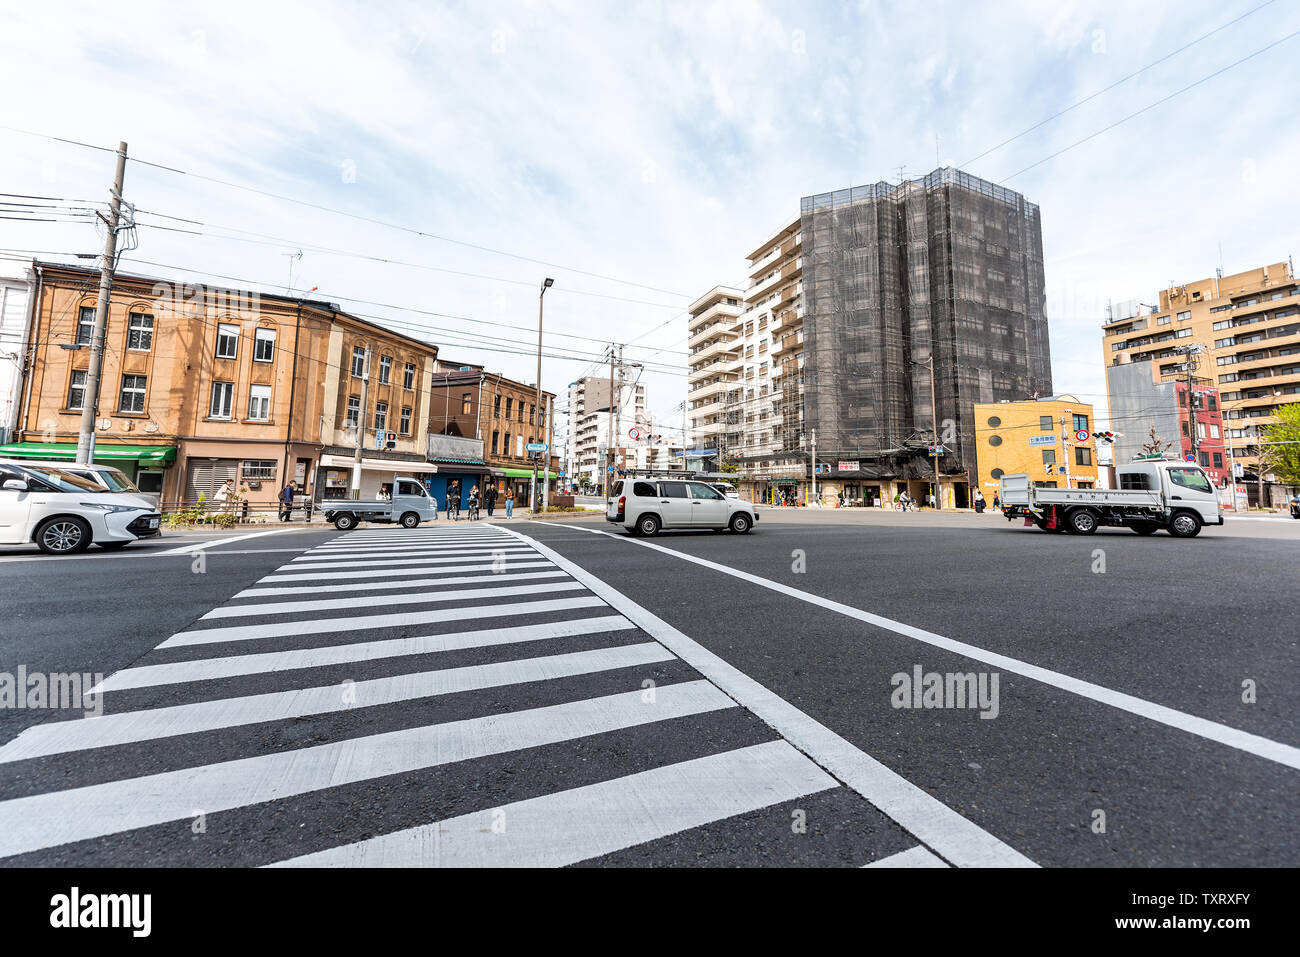 Kyoto, Japan - April 17, 2019: City street crossing wide angle view during sunny day morning near station with traffic Stock Photo